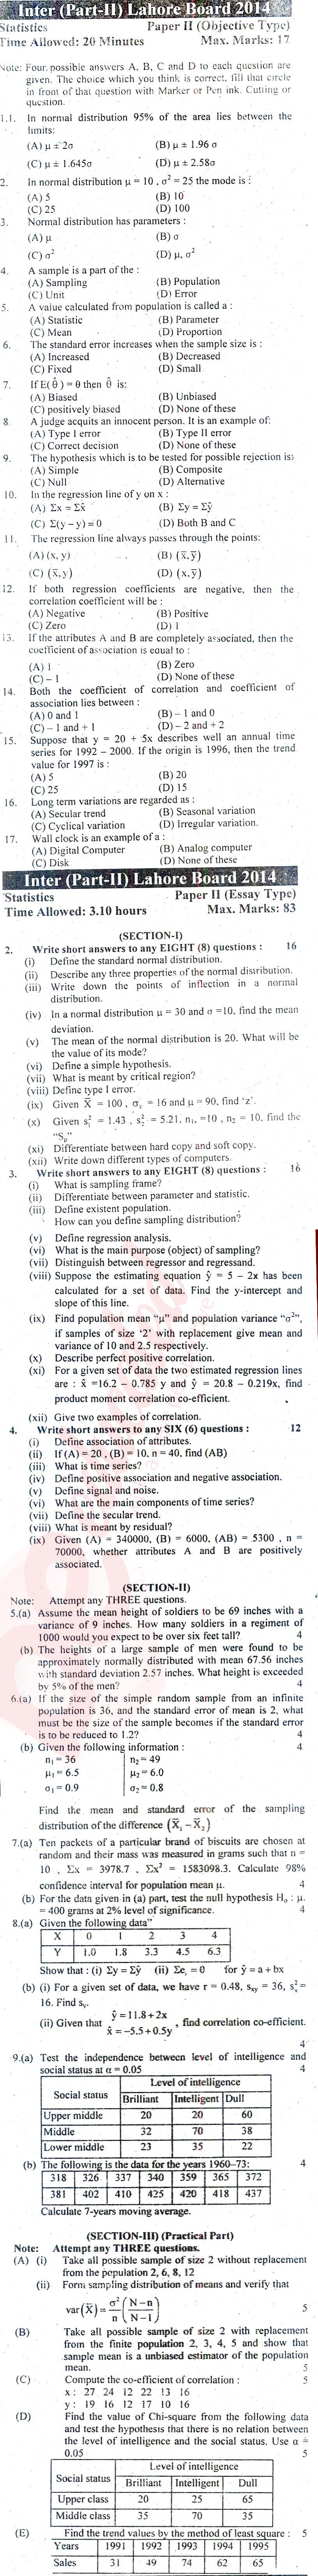 Statistics 12th class Past Paper Group 1 BISE Lahore 2014